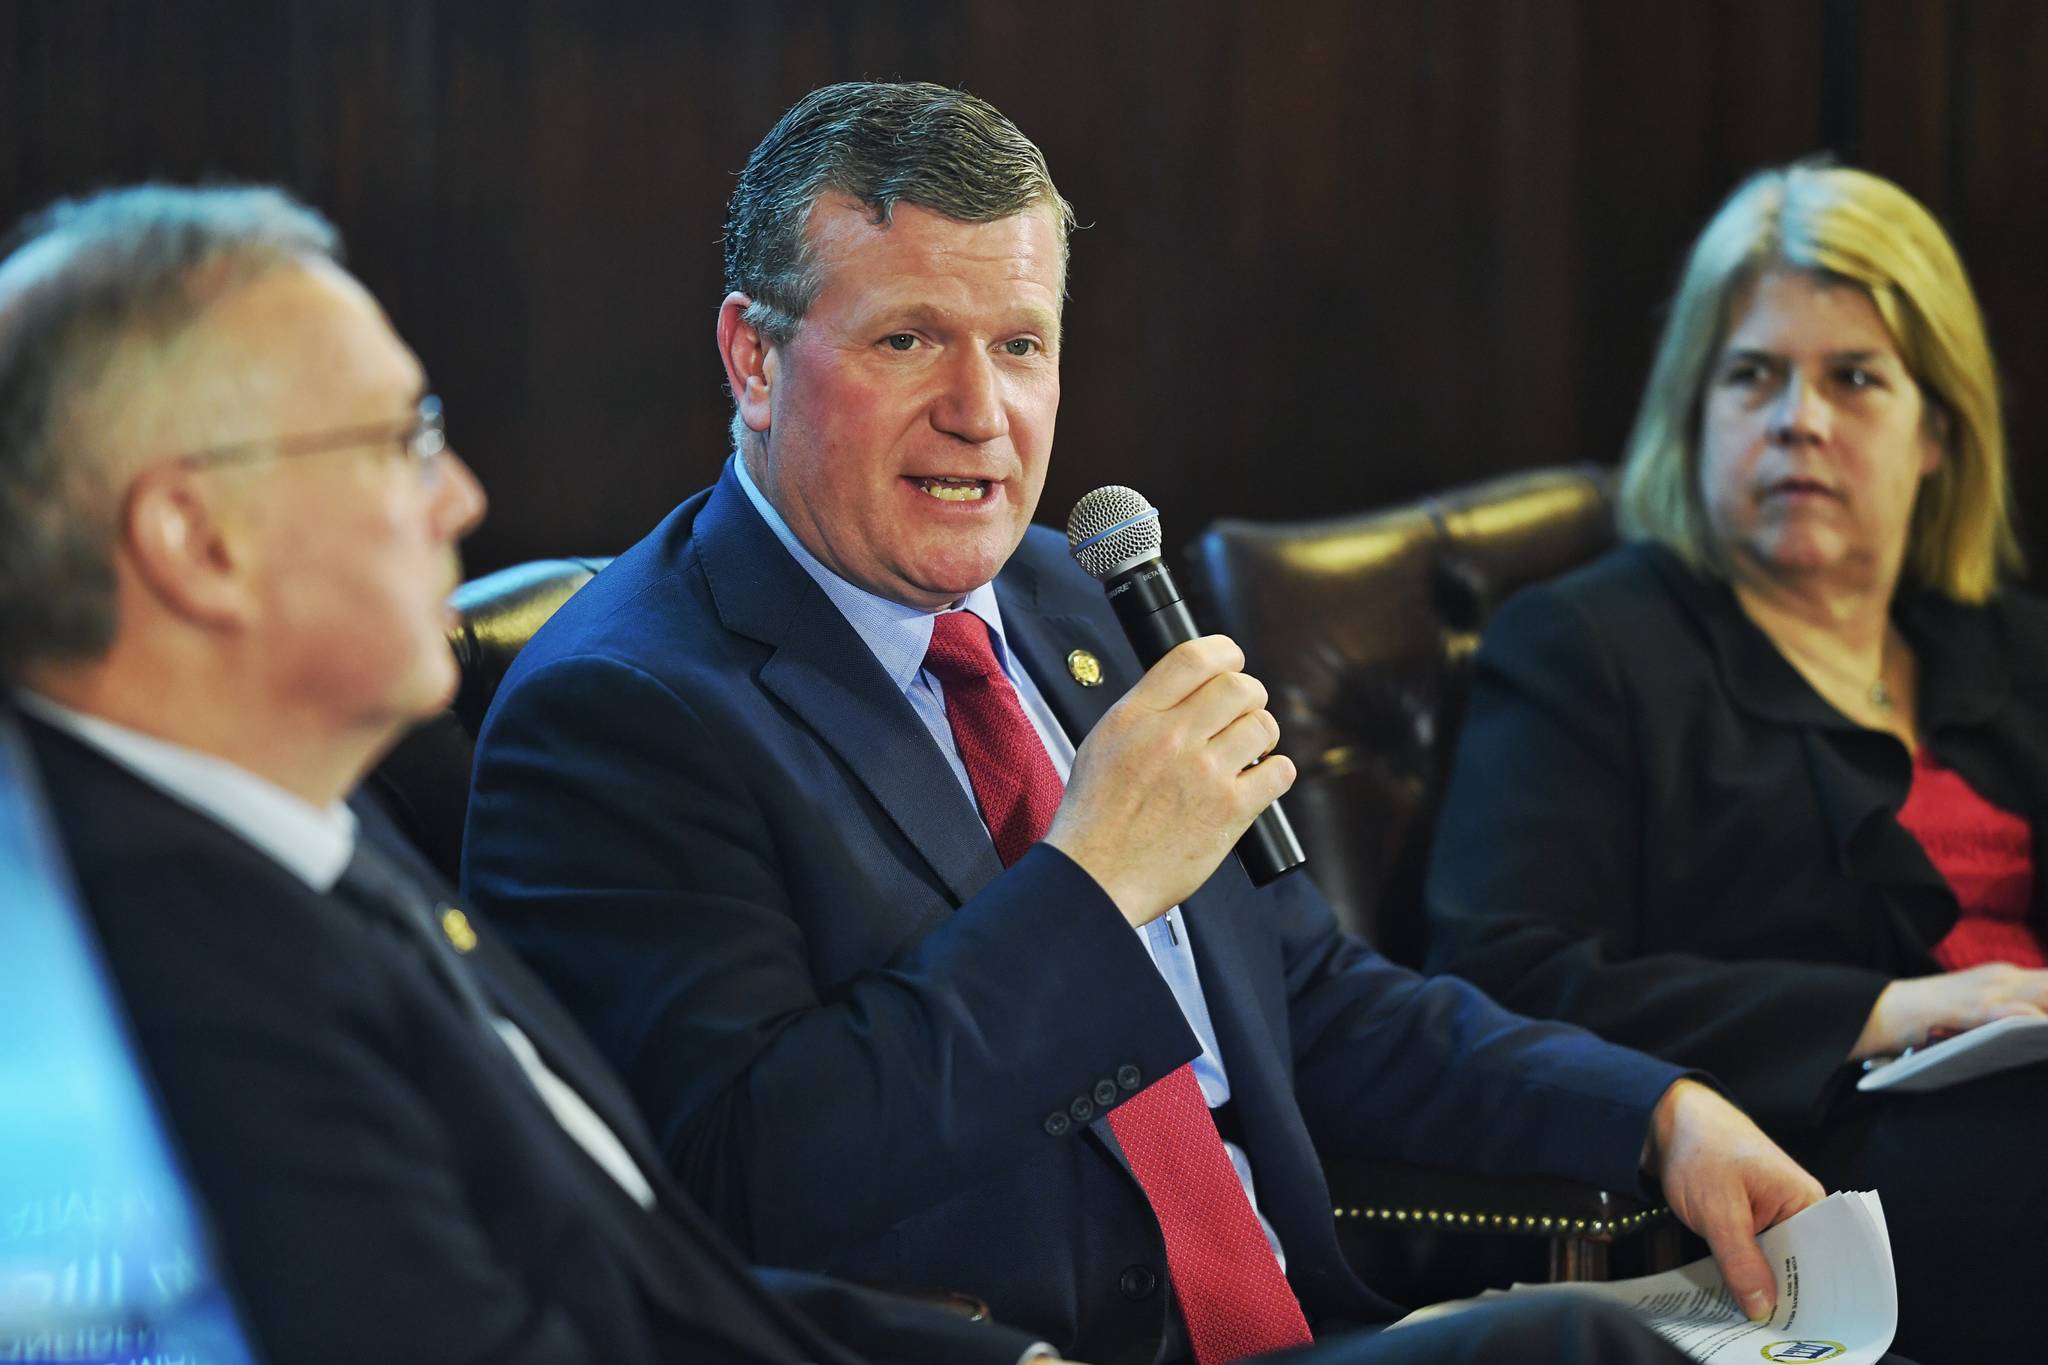 Rep. Chuck Kopp, R-Anchorage, center, speaks about the House passing a crime bill during a press conference with Speaker of the House Bryce Edgmon, D-Dillingham, left, and Rep. Tammie Wilson, R-North Pole, at the Capitol on Wednesday, May 8, 2019. Kopp will be one of the co-chairs of a group tasked with improving the Village Public Safety Officers program. (Michael Penn | Juneau Empire)